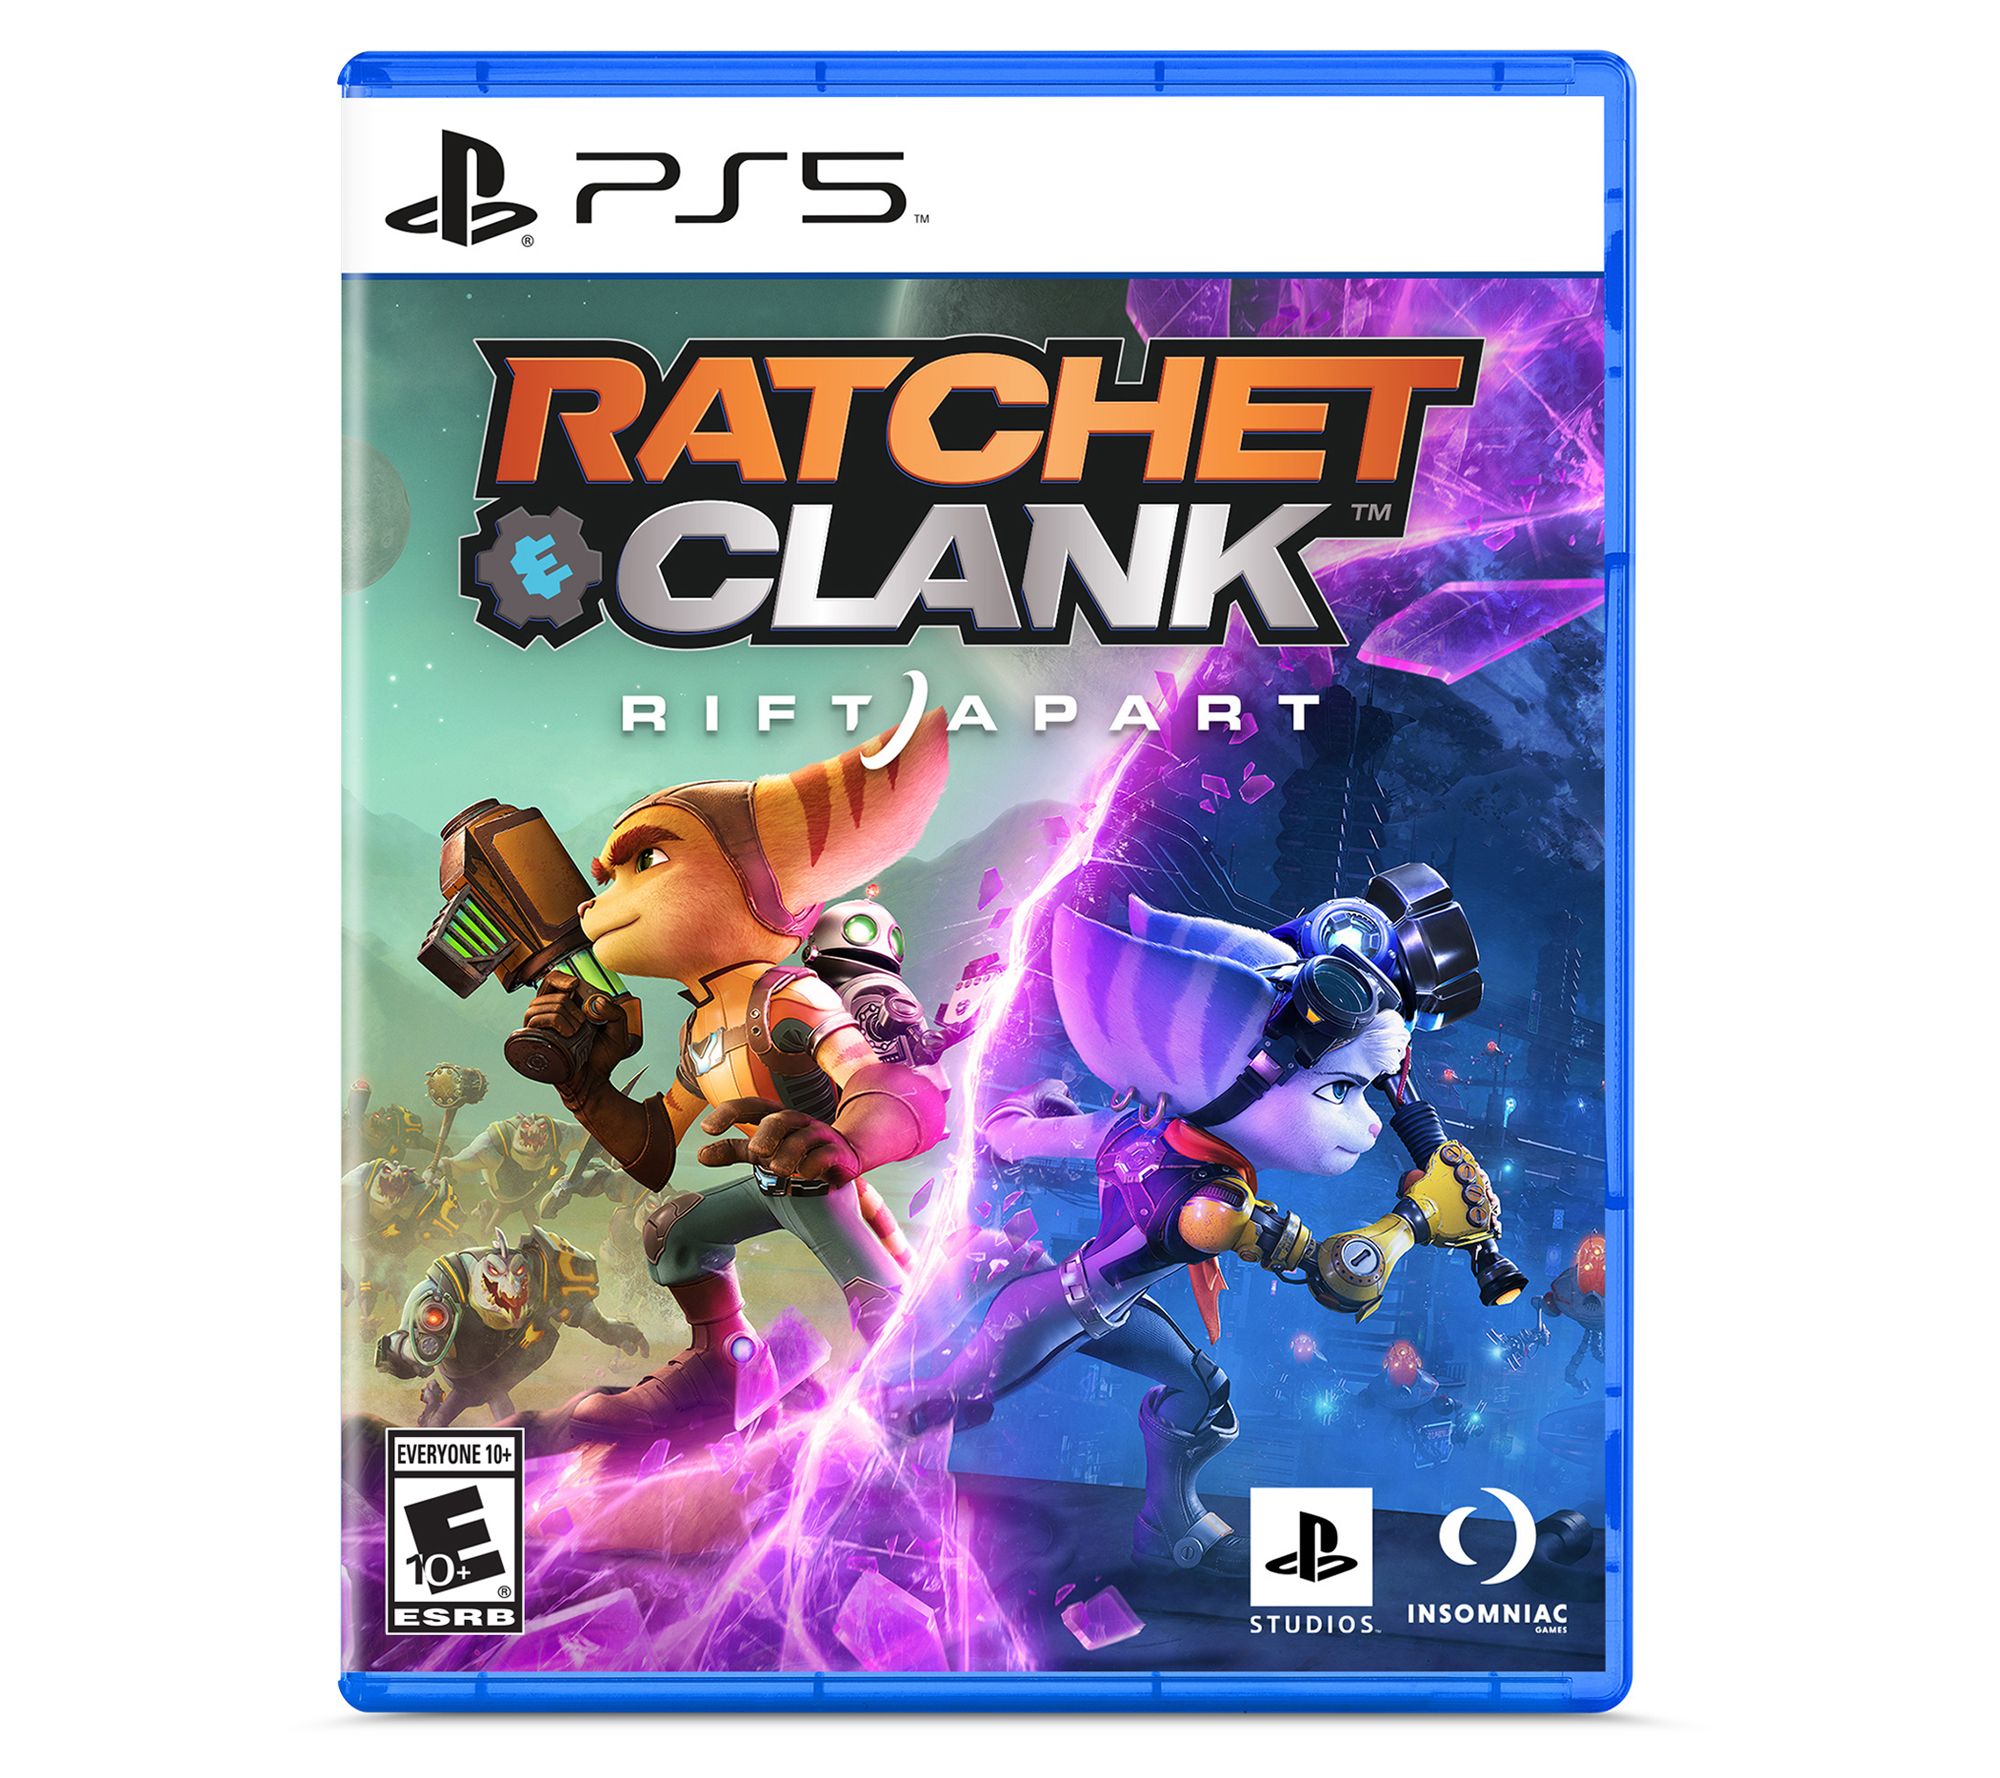 Ratchet & Clank: Rift Apart, 7 Tips to get you started